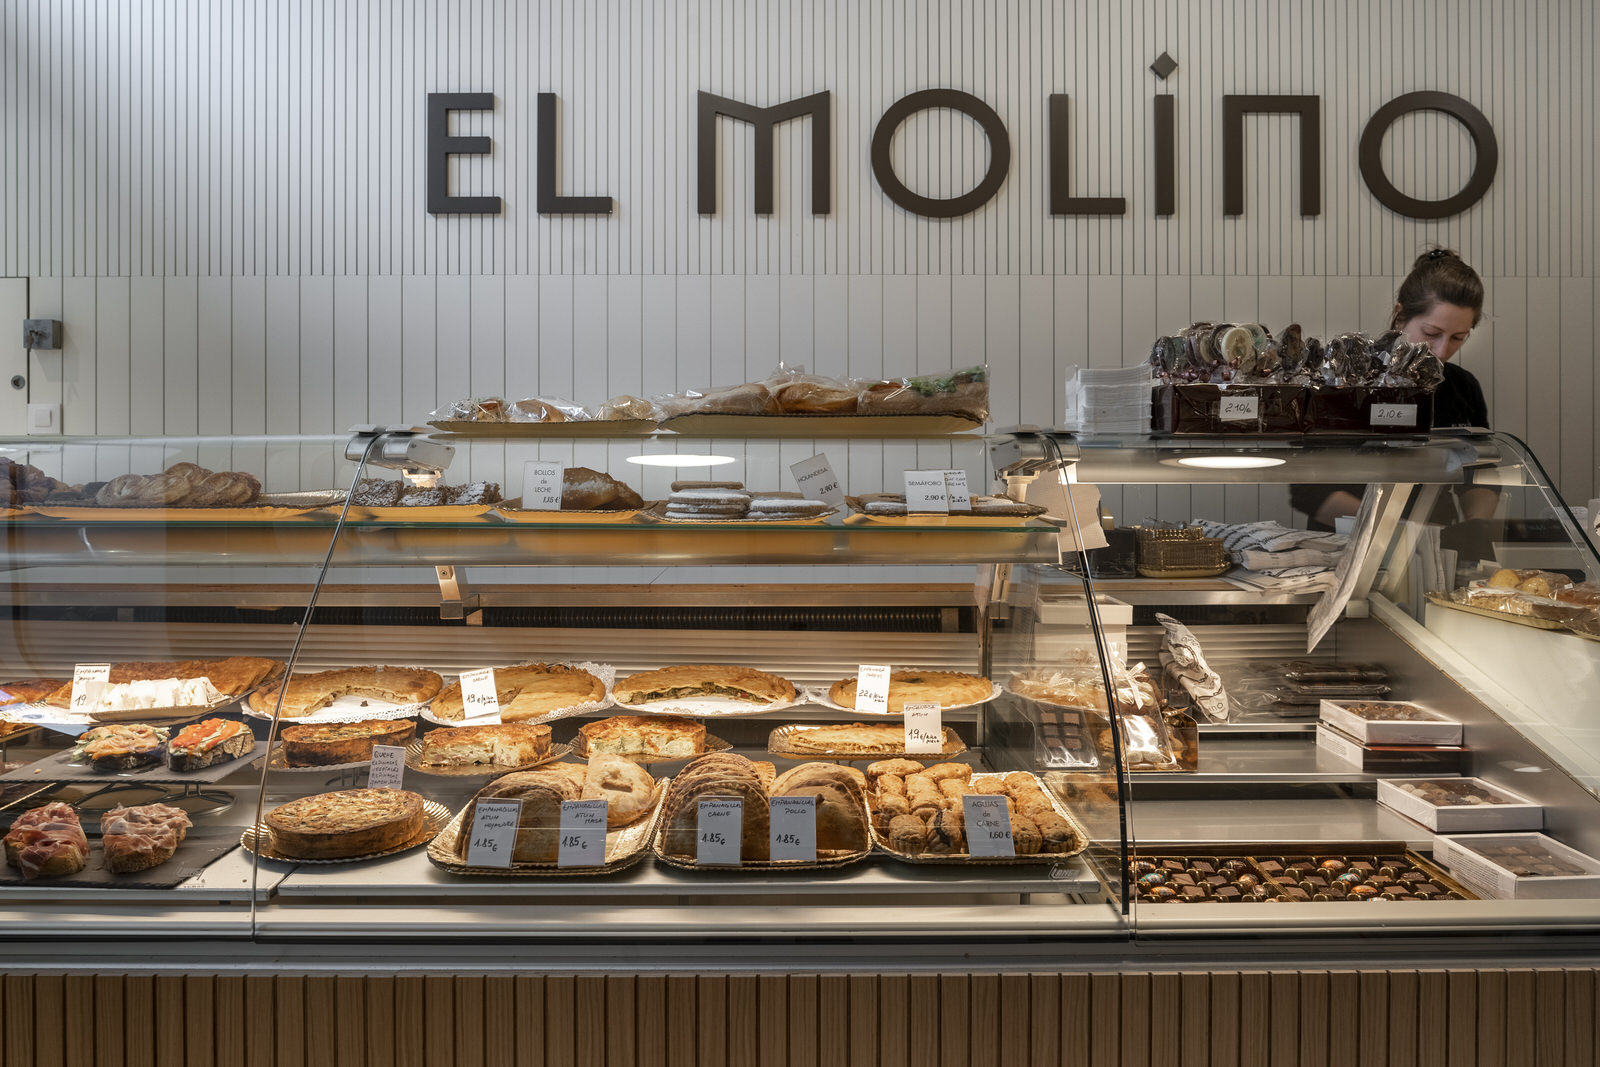 Image of the El Molino counter with an exhibition of sweet products